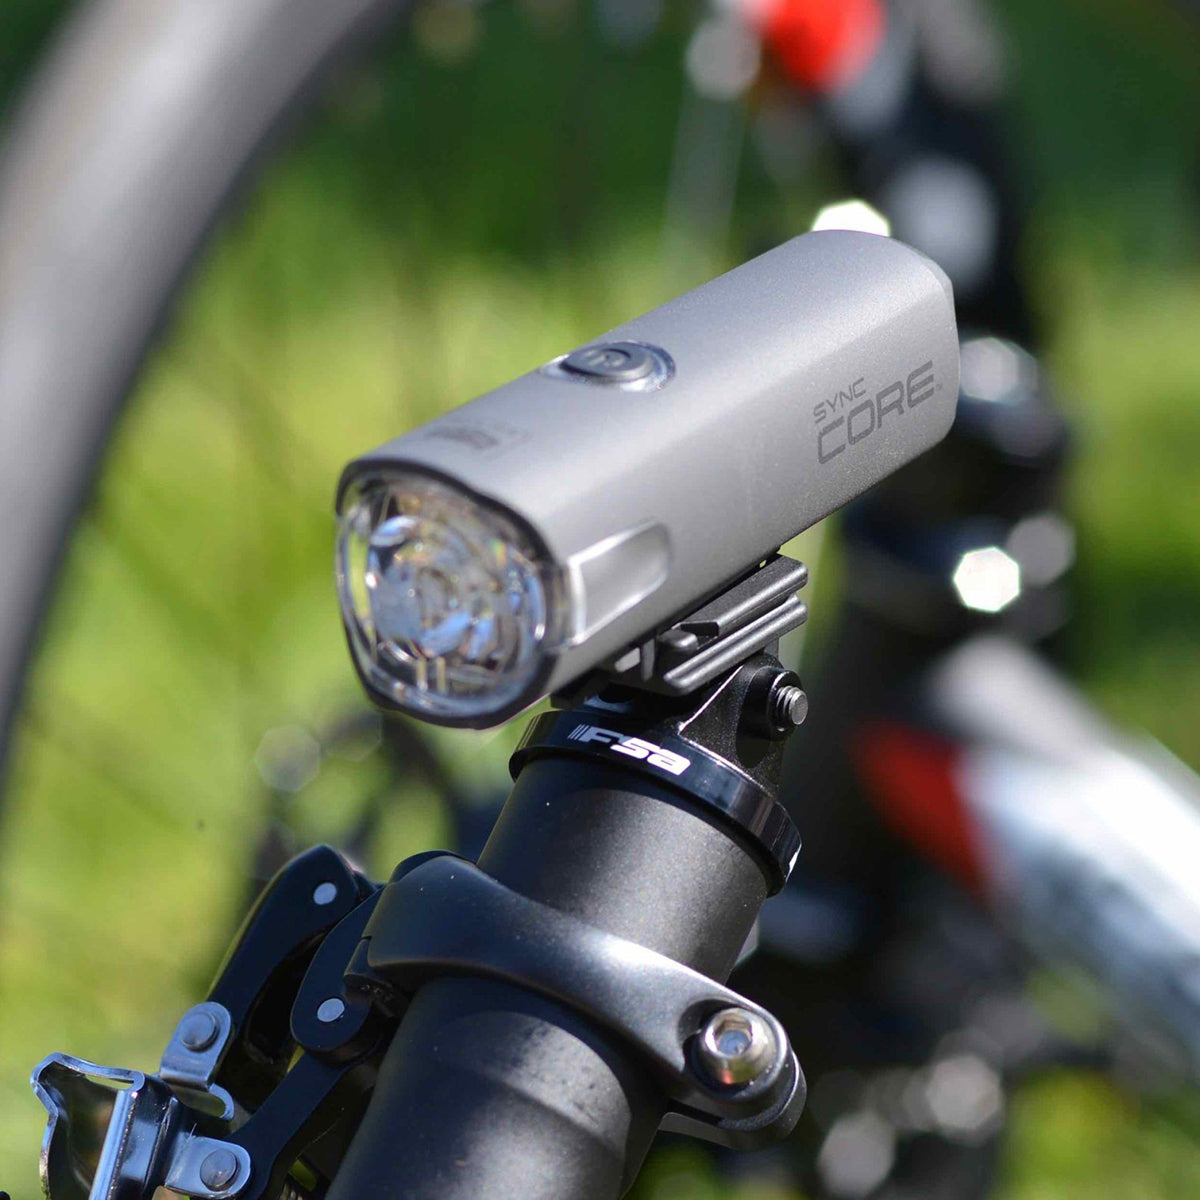 CatEye Sync Core Bicycle Light - HL-NW100RC CatEye